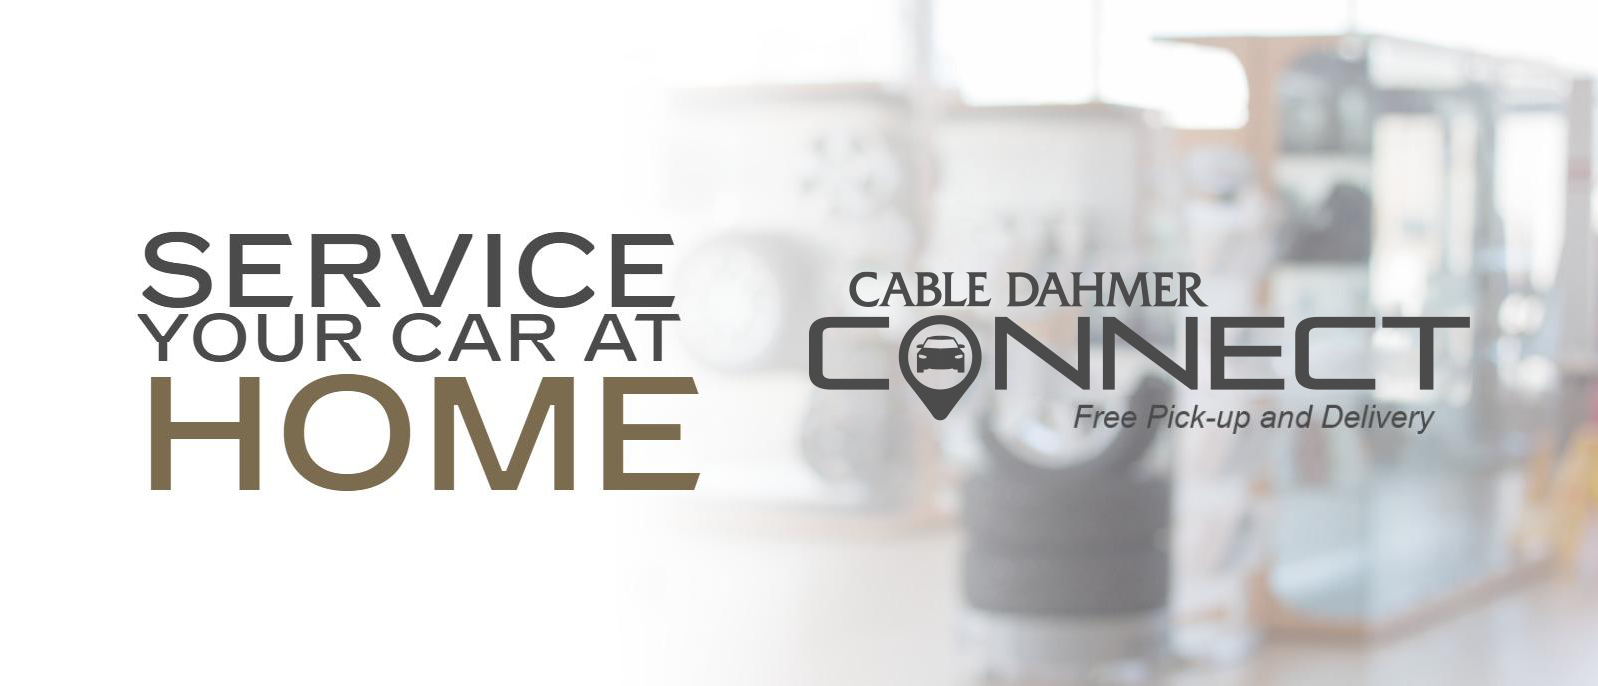 Service your car at home with Cable Dahmer connect